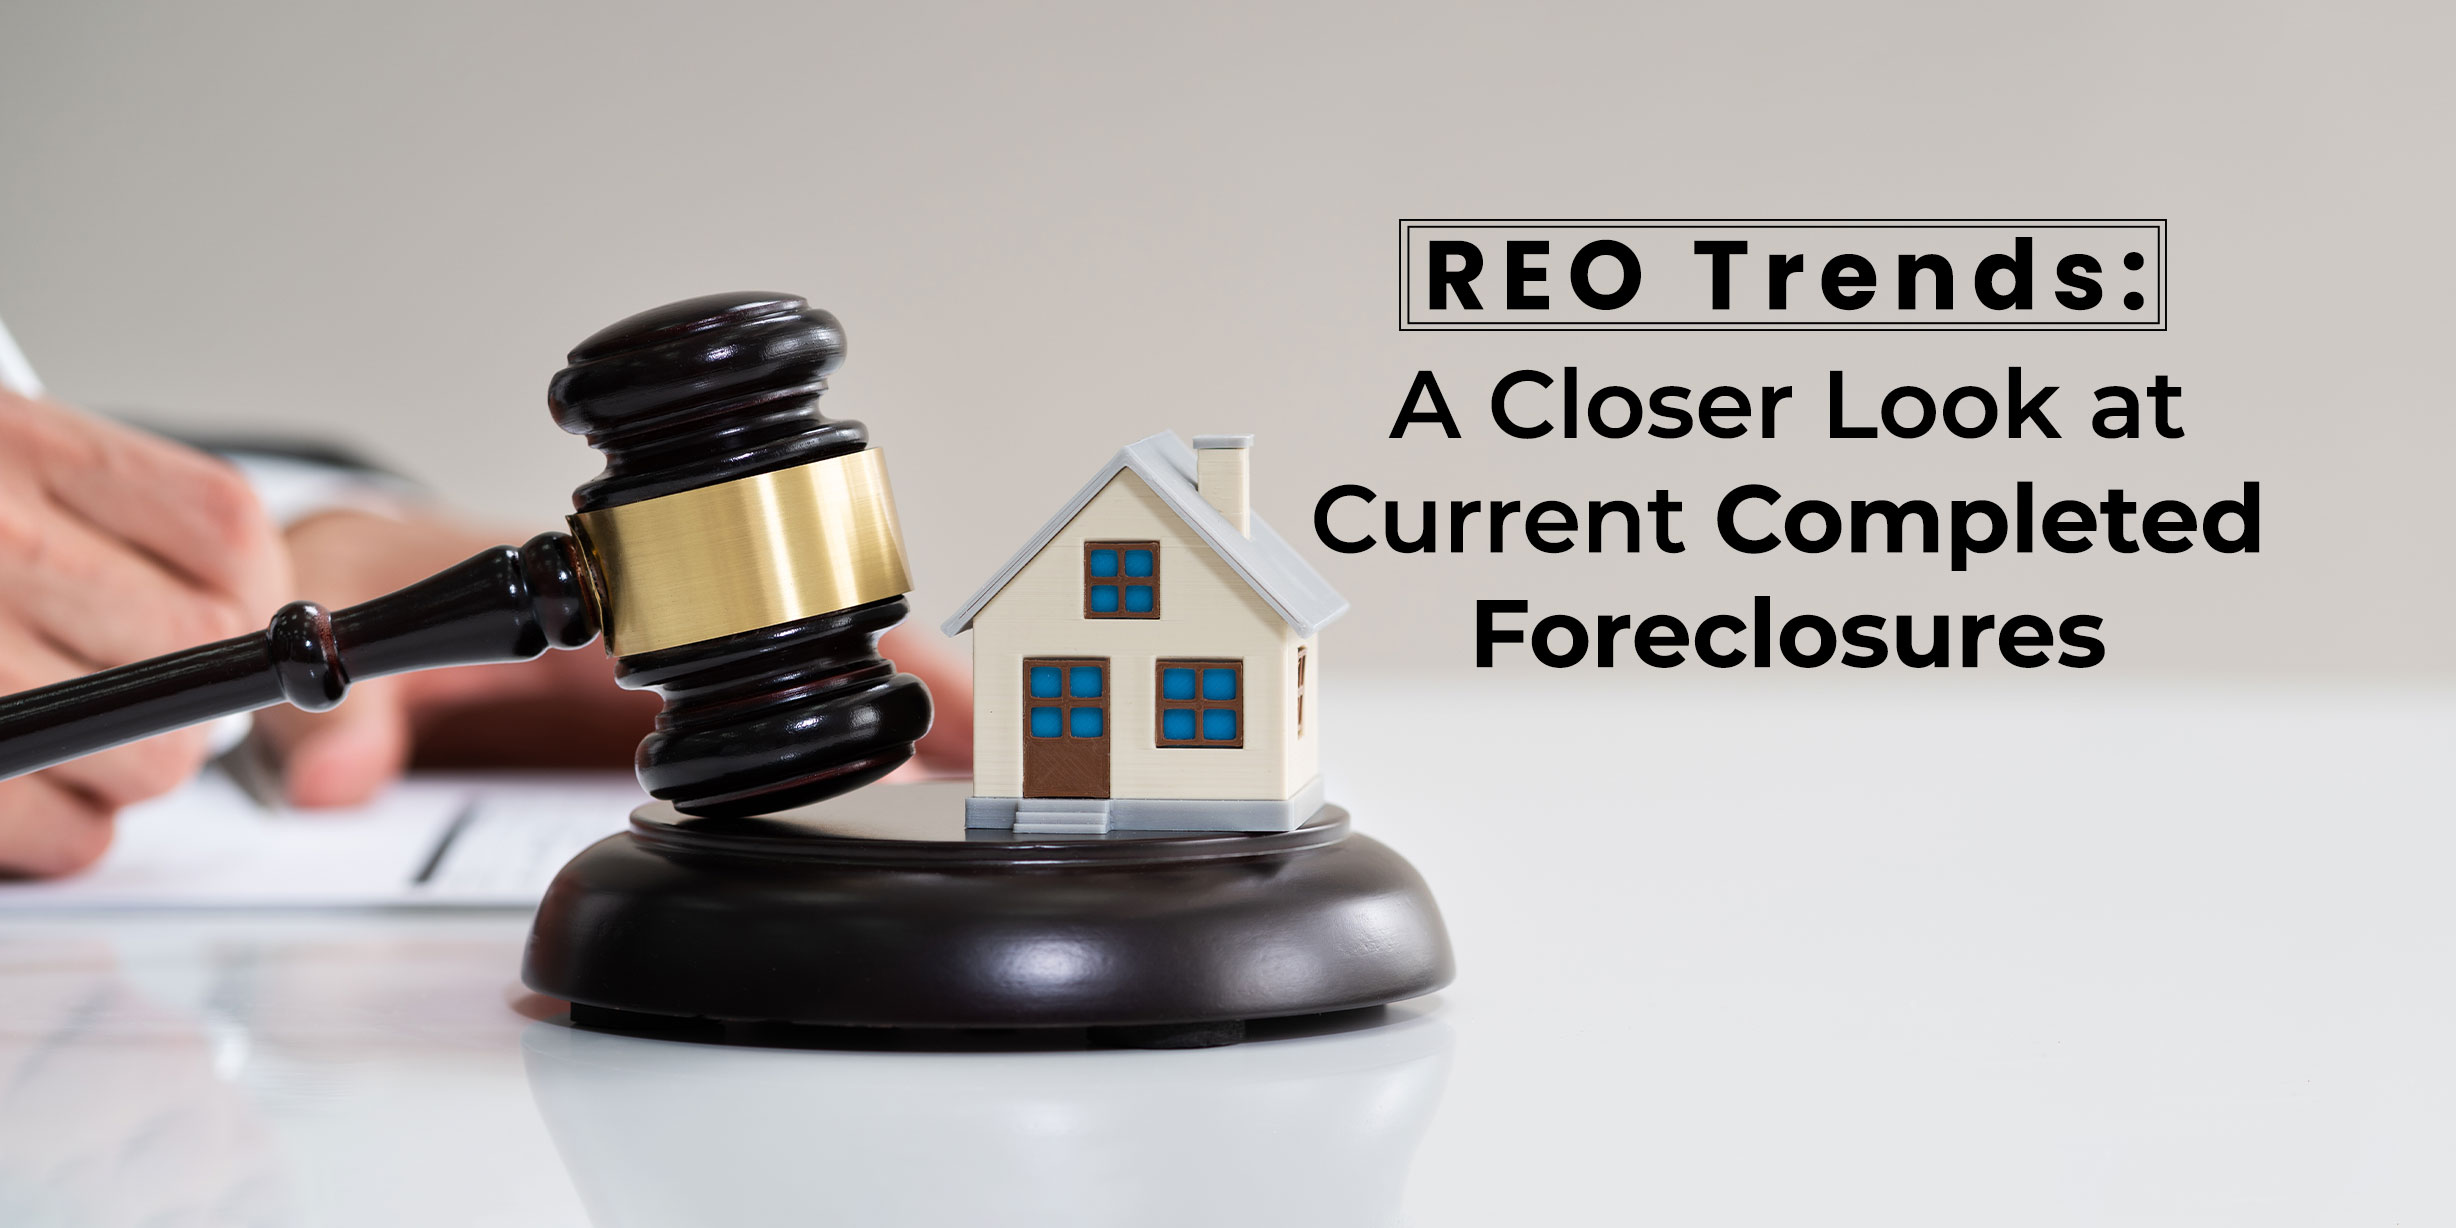 REO Trends: A Closer Look at Current Completed Foreclosures